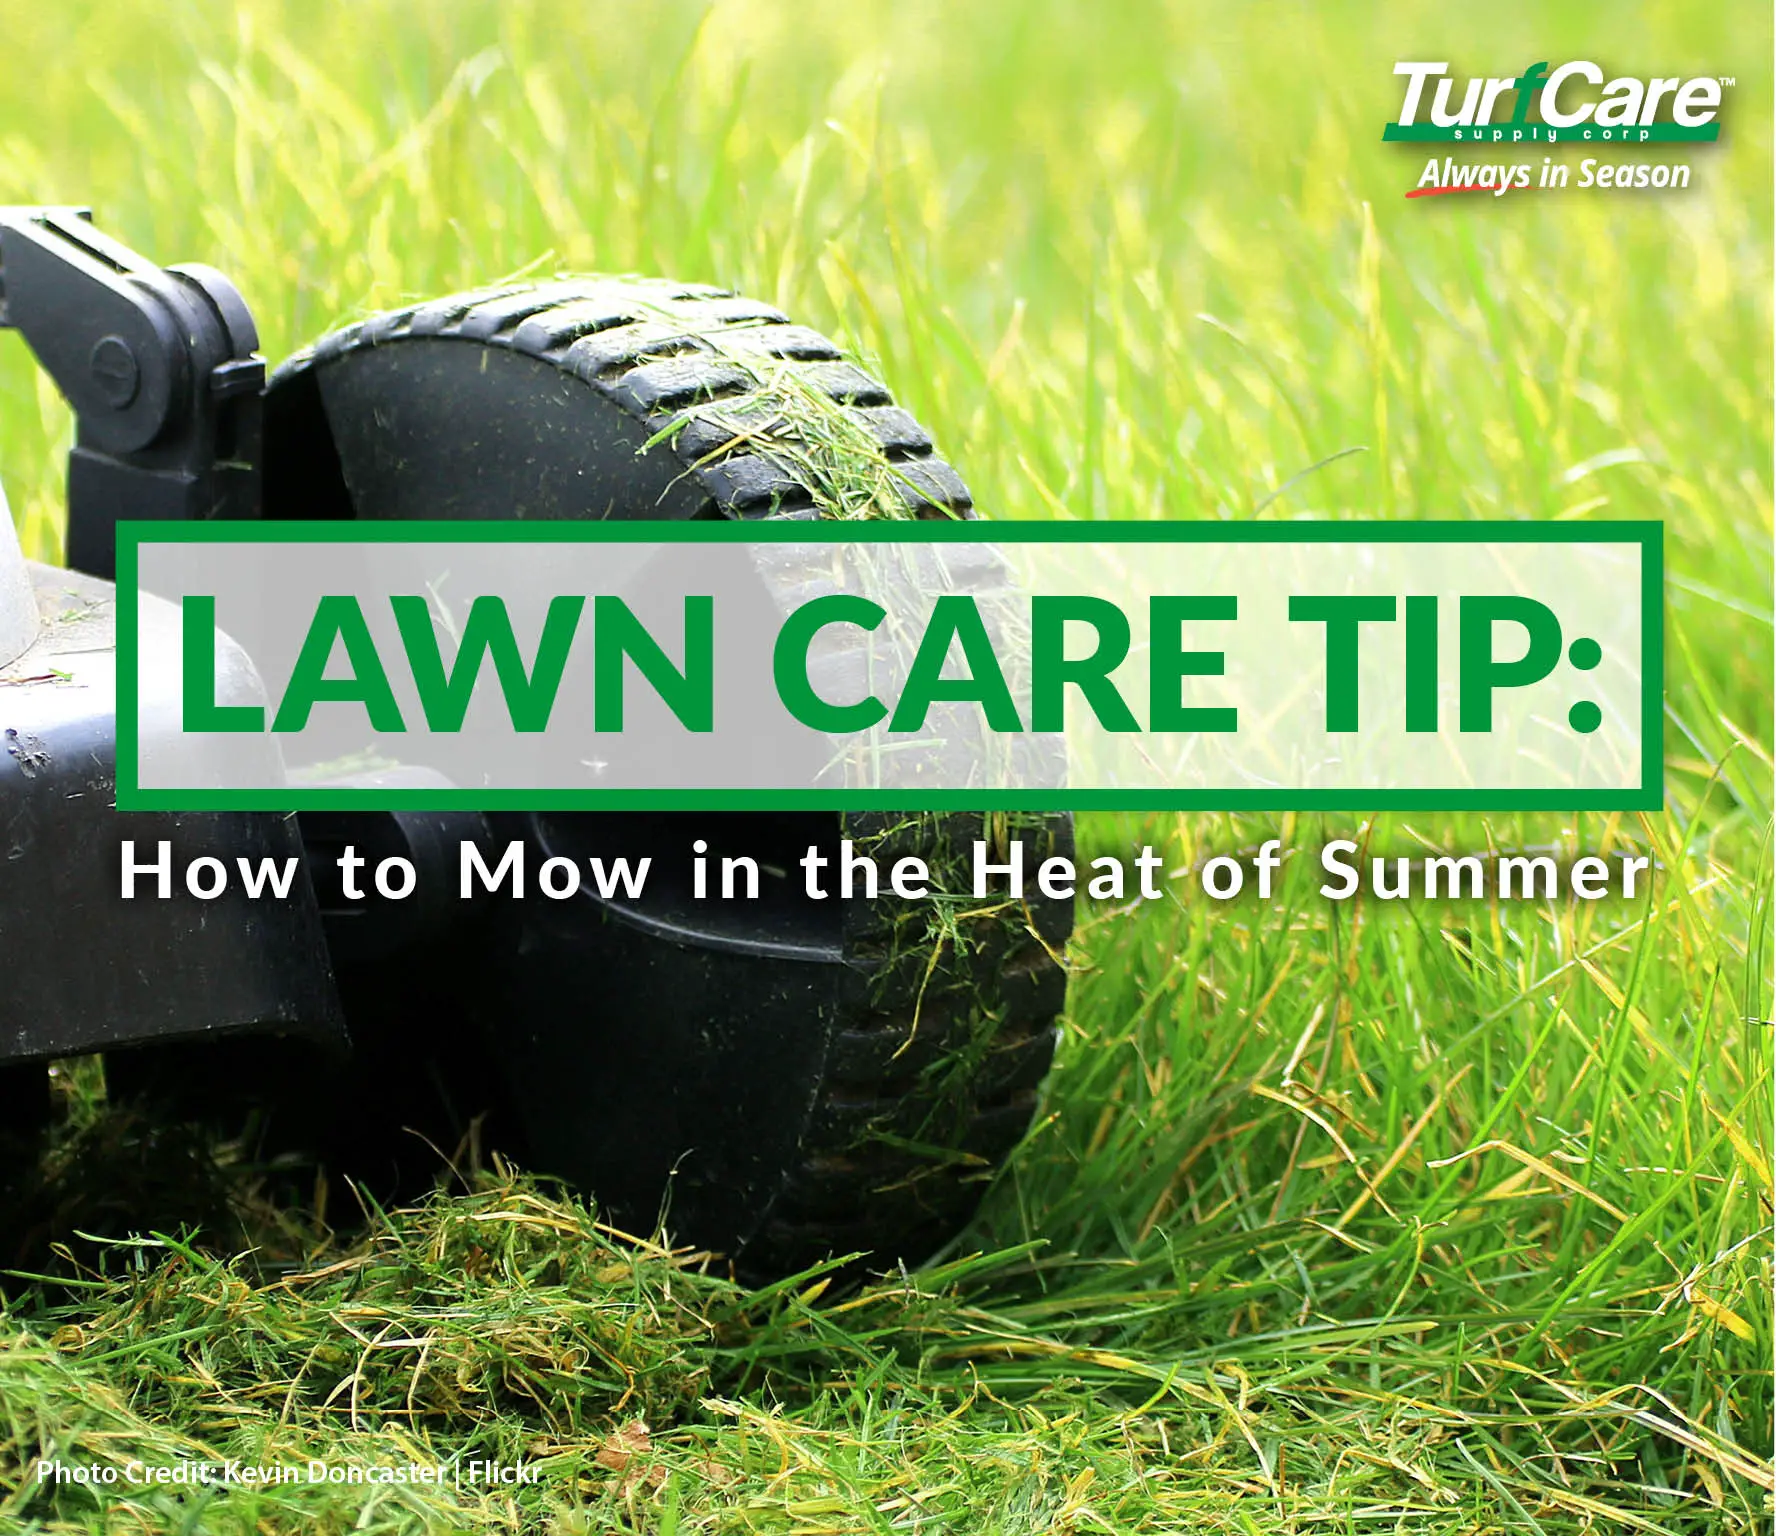 Lawn Care Tip: How to Mow in the Heat of Summer